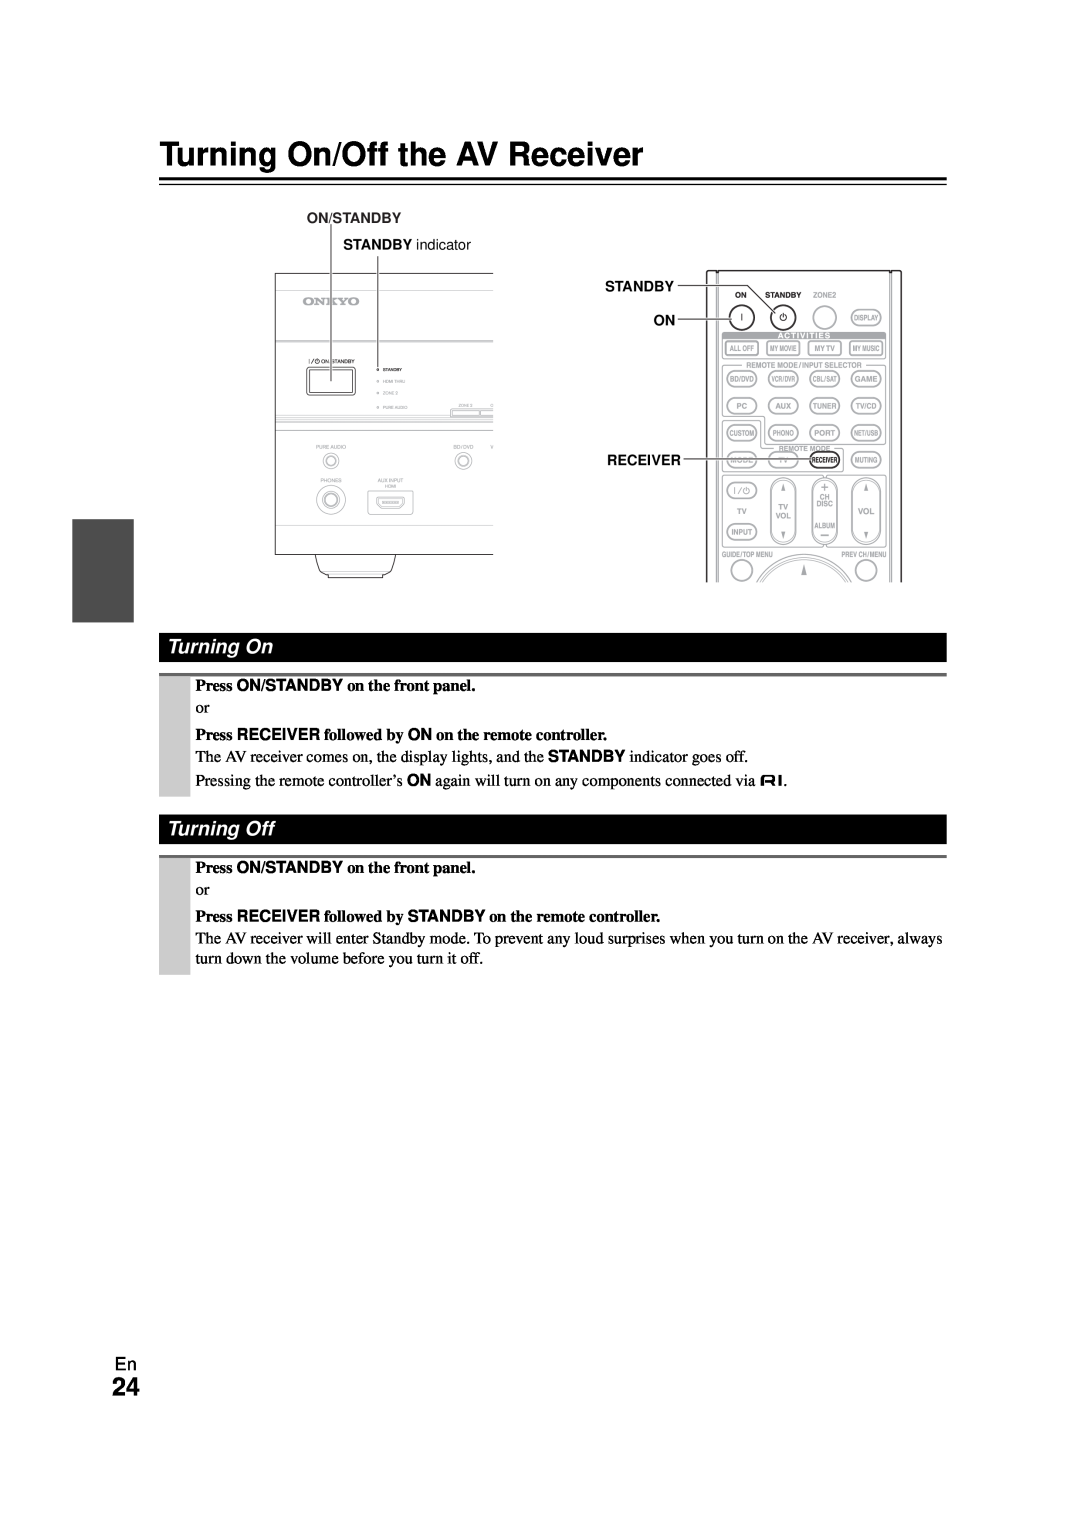 Onkyo HT-RC270 instruction manual Turning On/Off the AV Receiver, Turning Off 